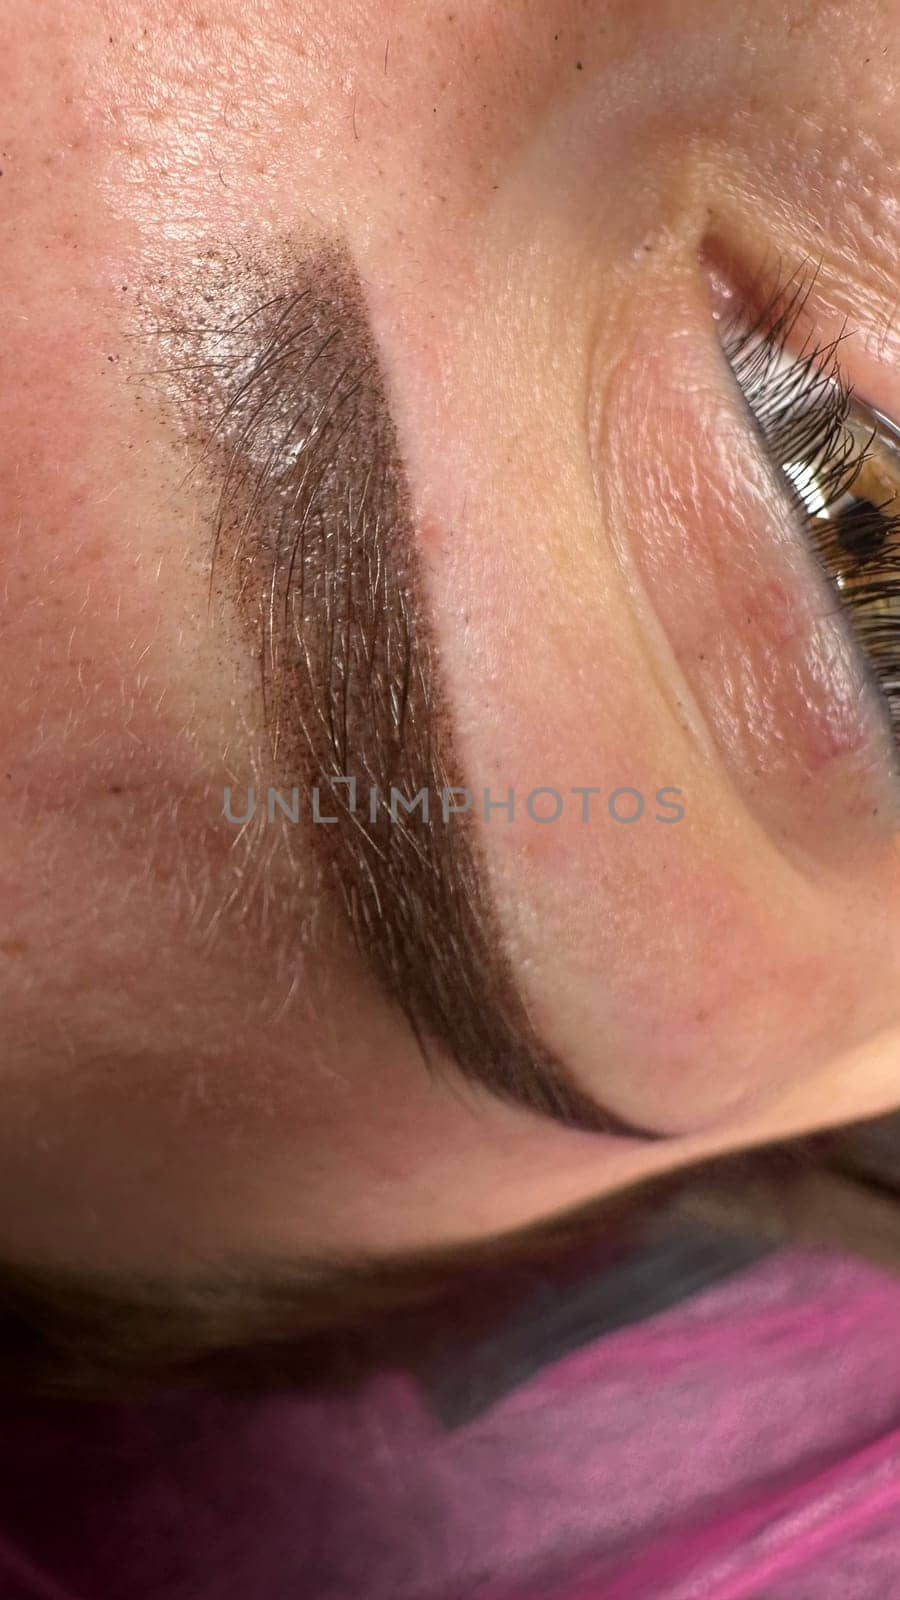 Eyebrows tattoo or Permanent Makeup. Detail of beautiful woman